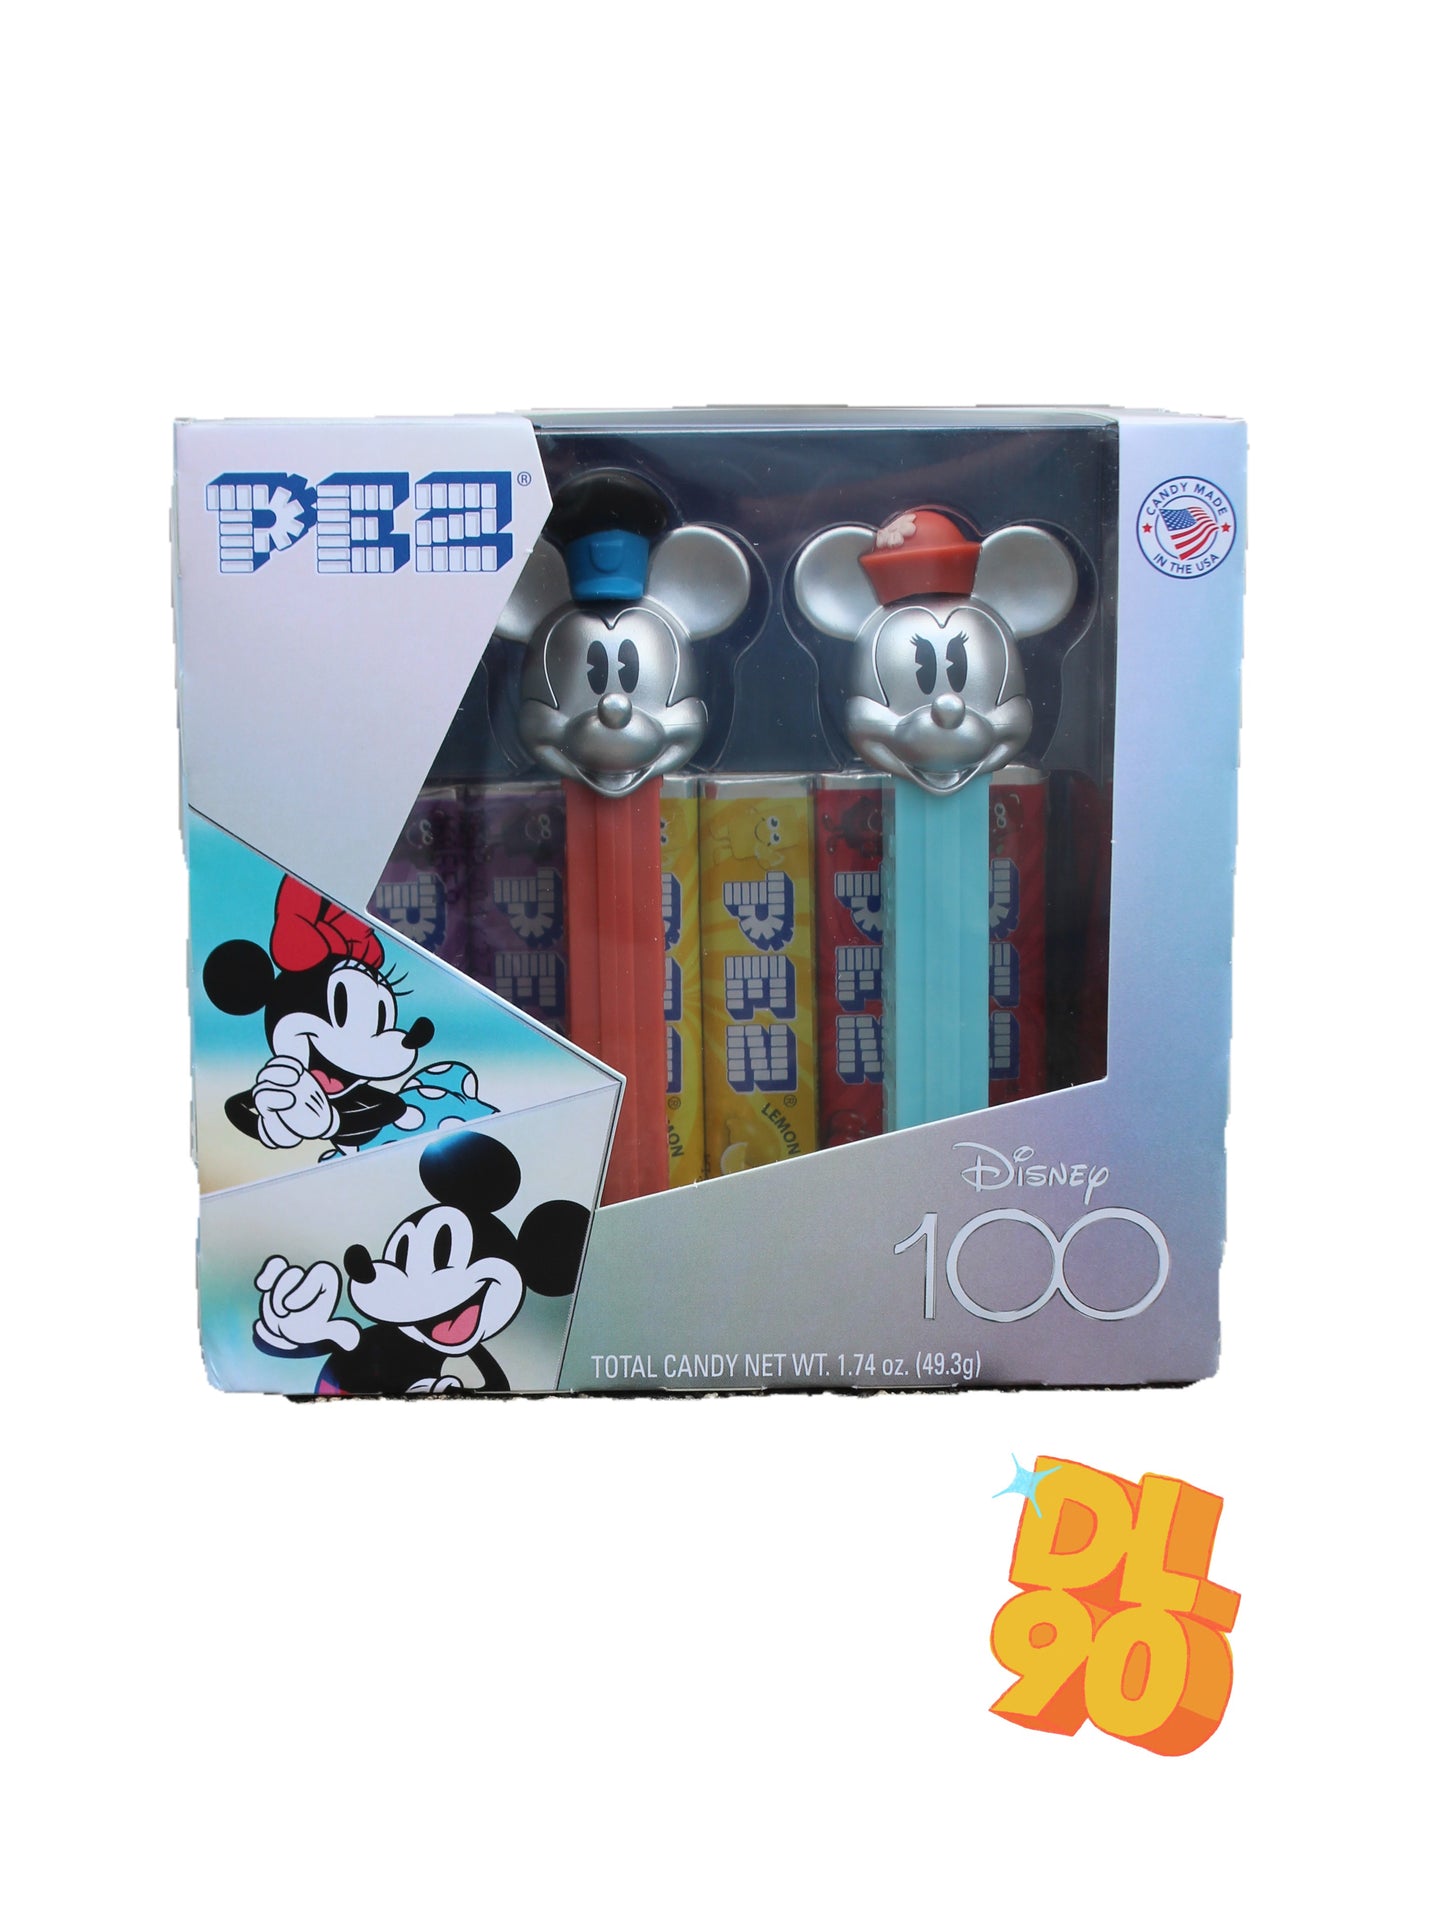 Retro Mickey & Minnie Twin Pack, Platinum Edition Disney 100th Anniversary, Loose or Mint in Twin Pack!  BACK IN STOCK